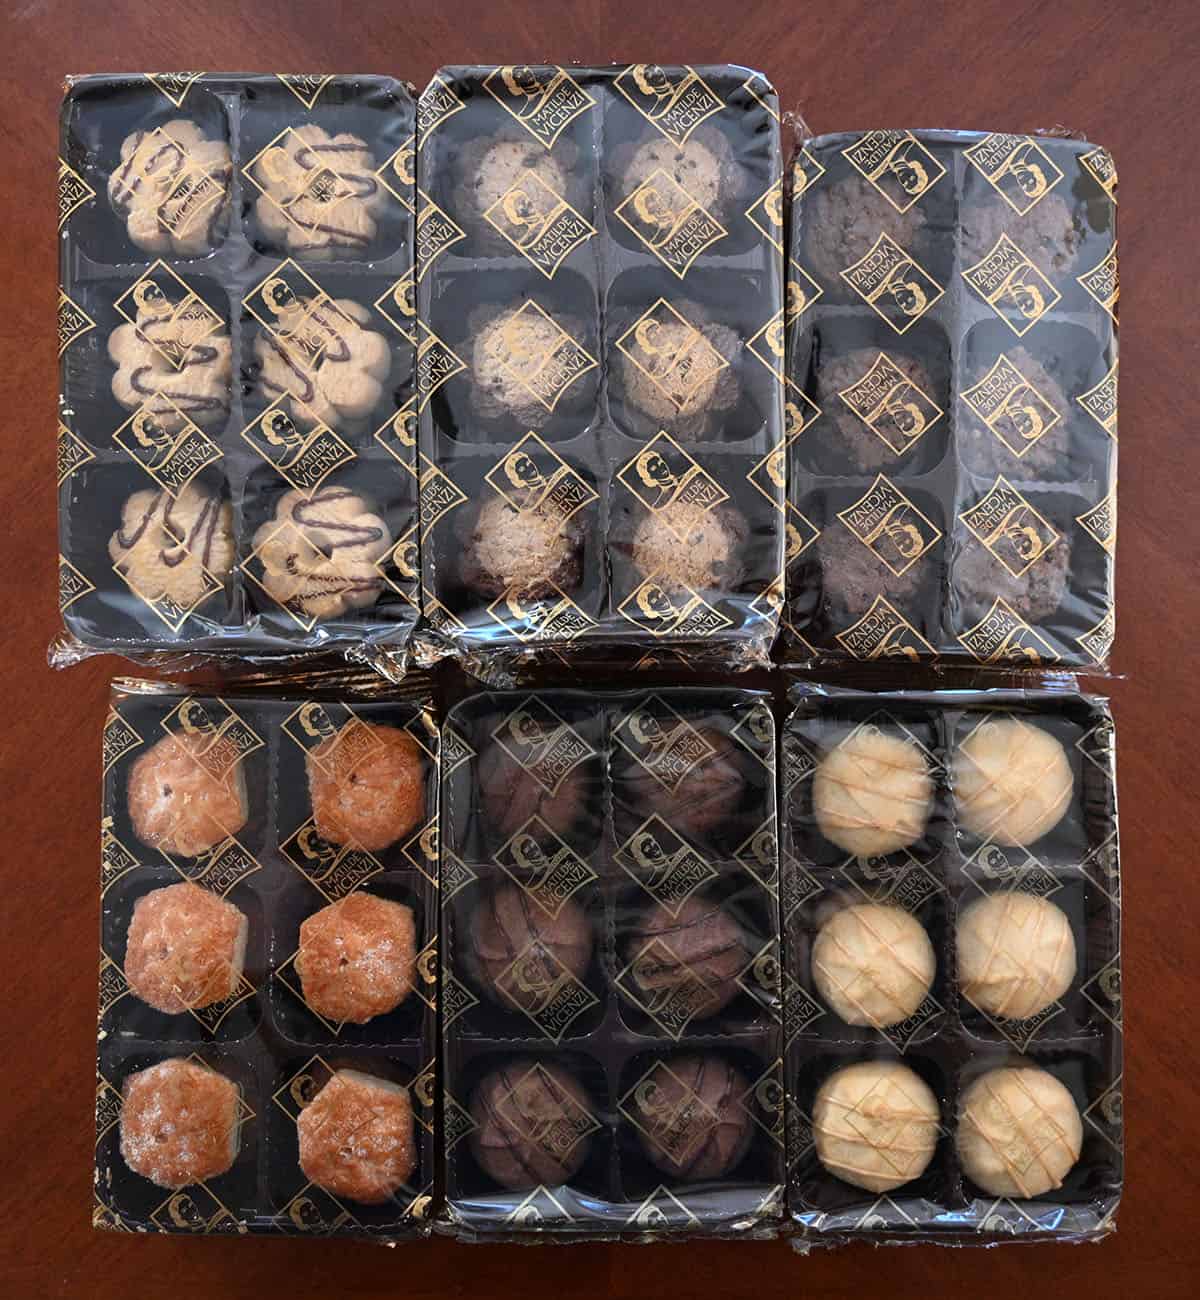 Image showing the six different kinds of cookies in their own plastic tray with plastic packaging.